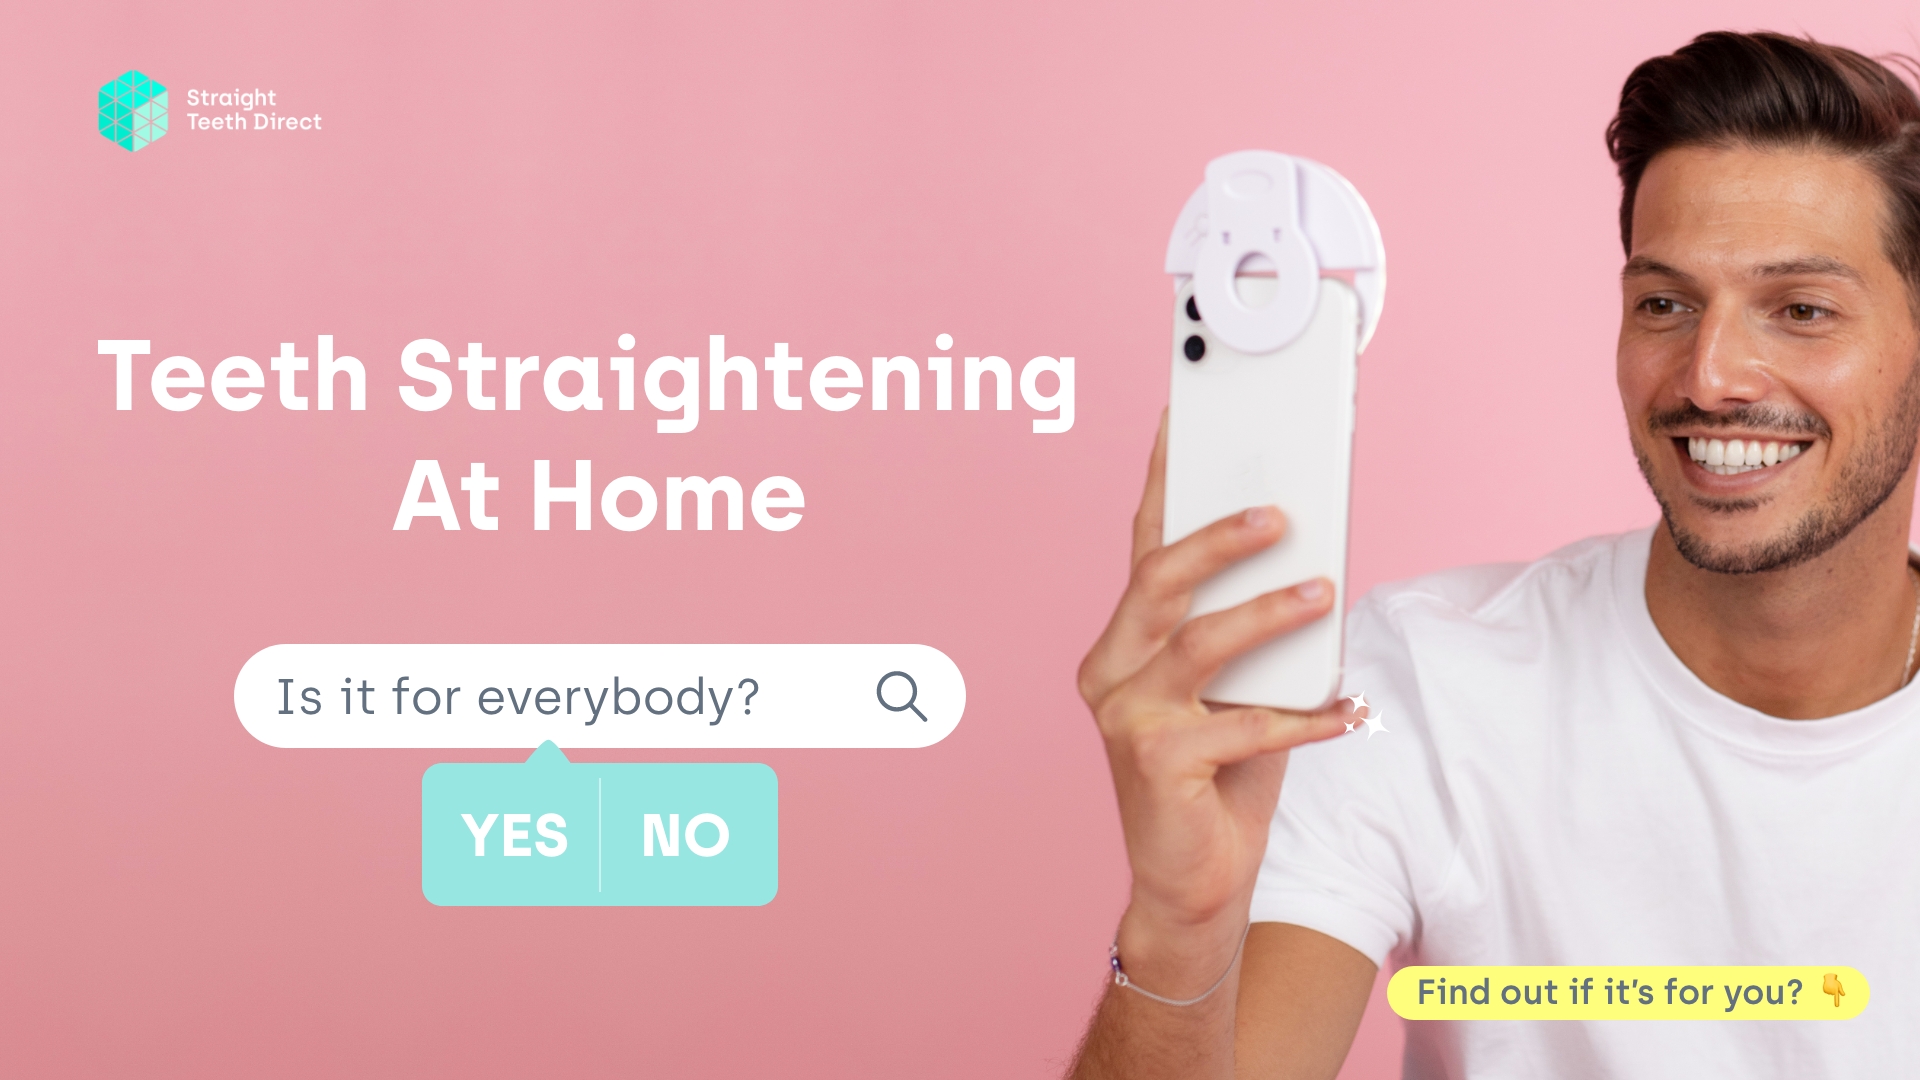 Teeth Straightening At Home – Not For Everybody